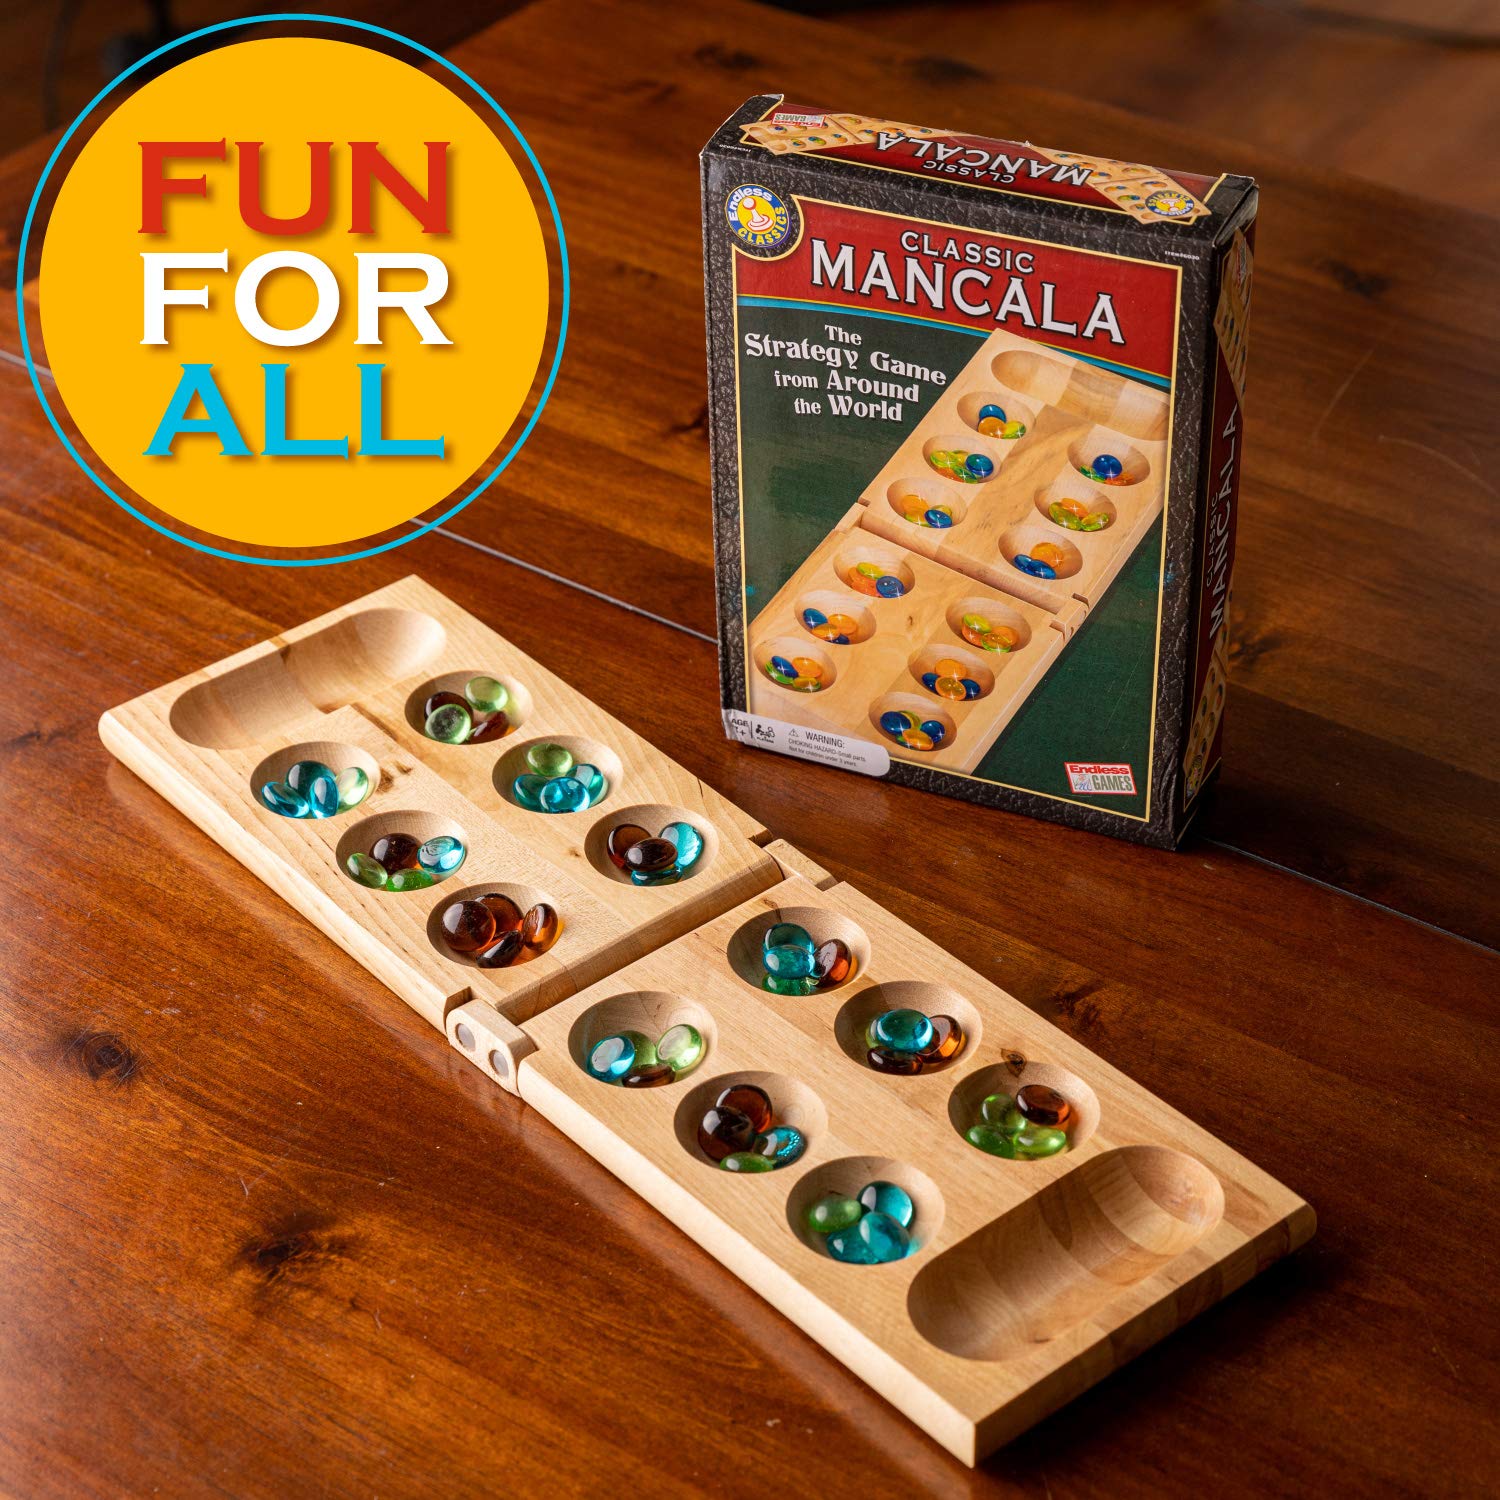 Classic Mancala - Fun Board Game for Friends and Family - Timeless Strategy Game